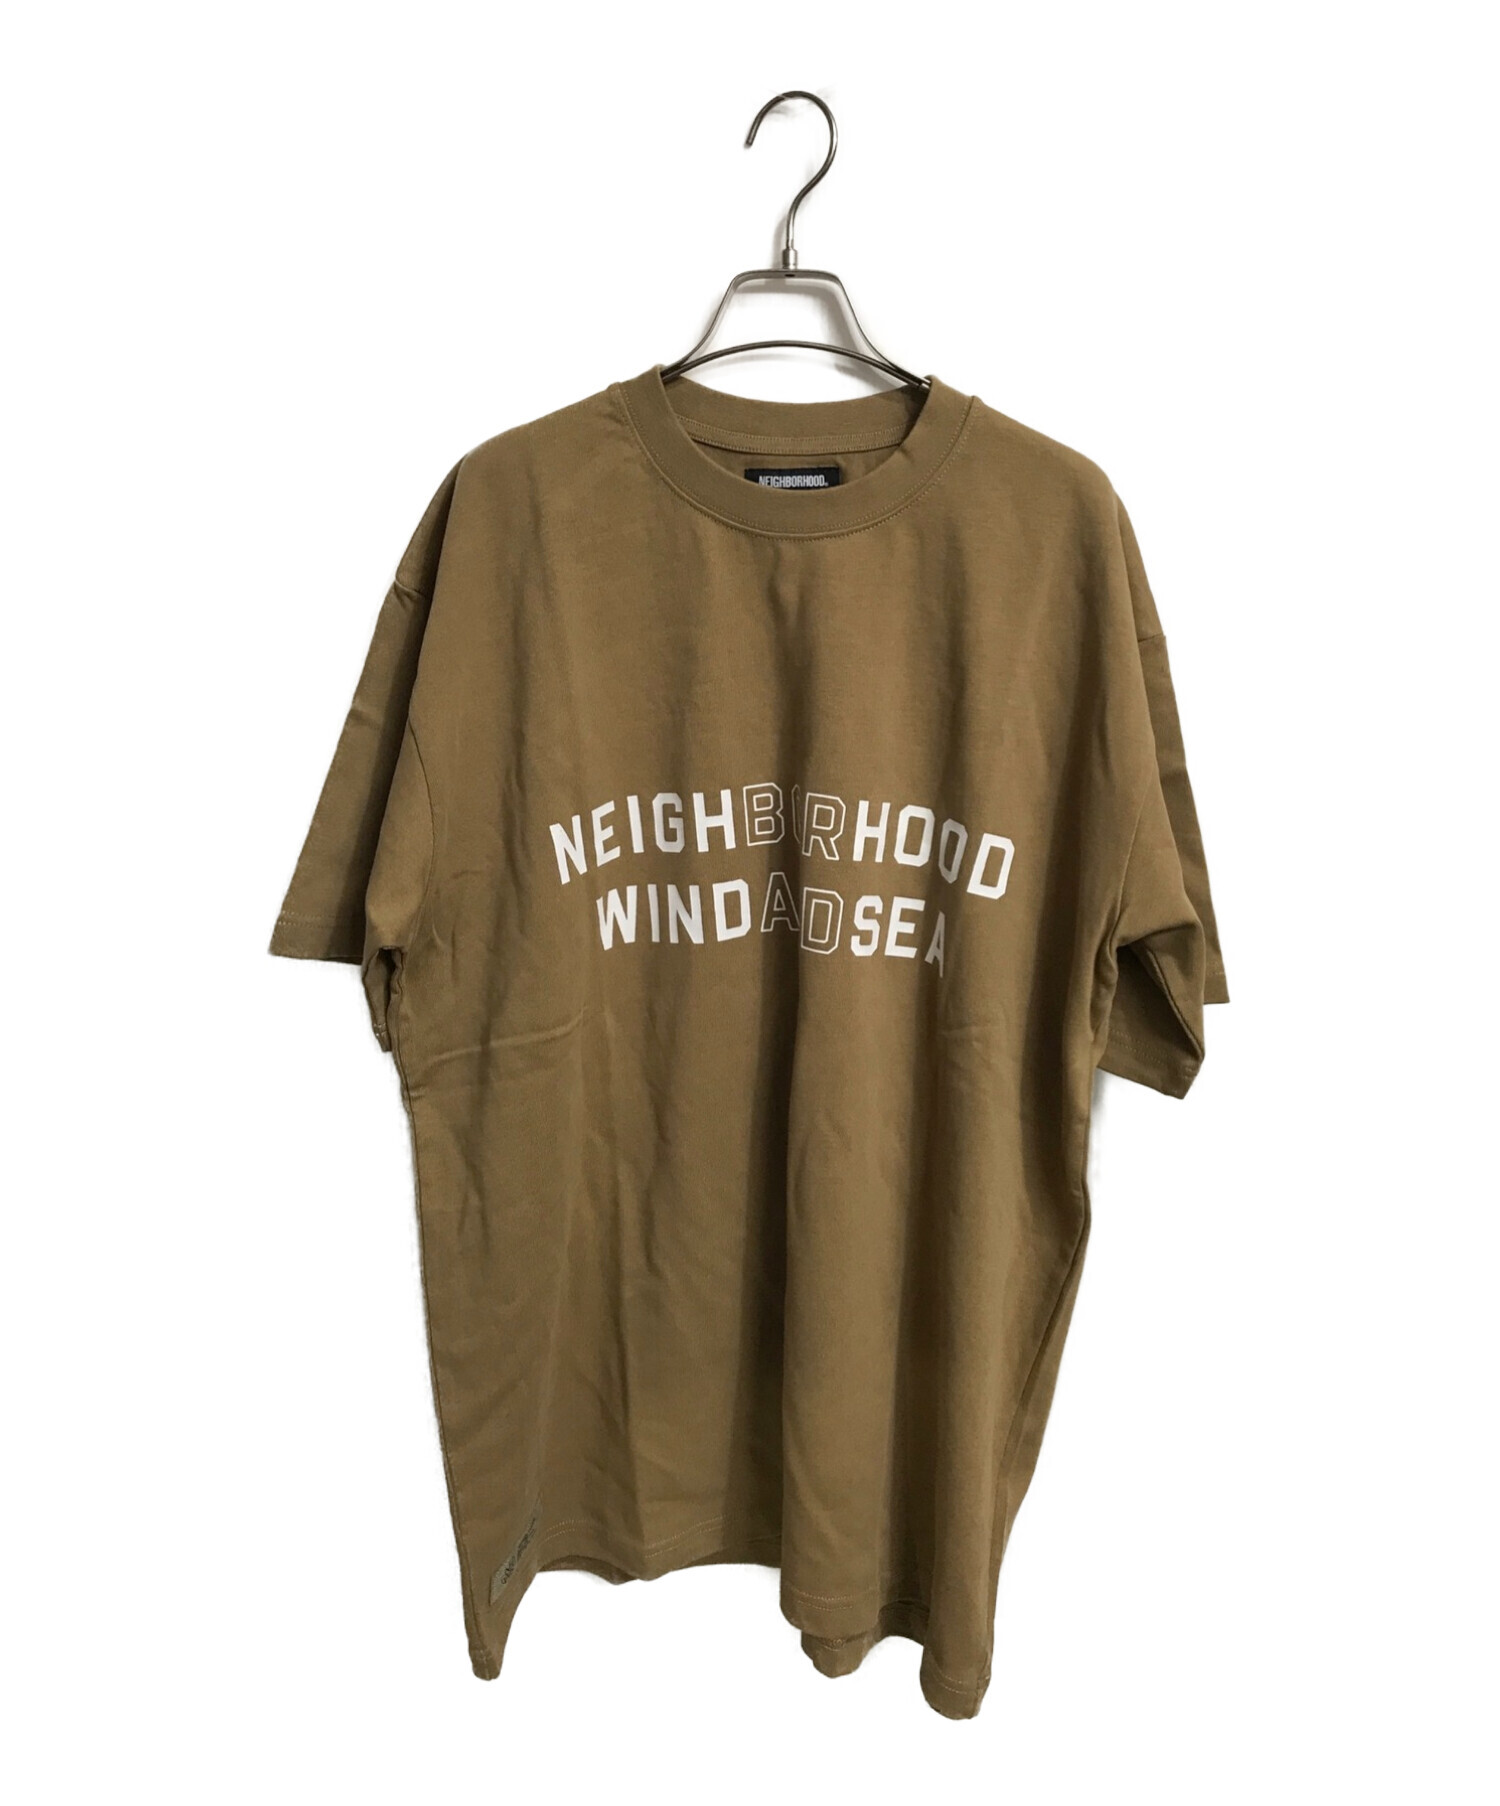 WIND AND SEA S/S T-SHIRT BROWN-BEIGE - Tシャツ/カットソー(半袖/袖なし)